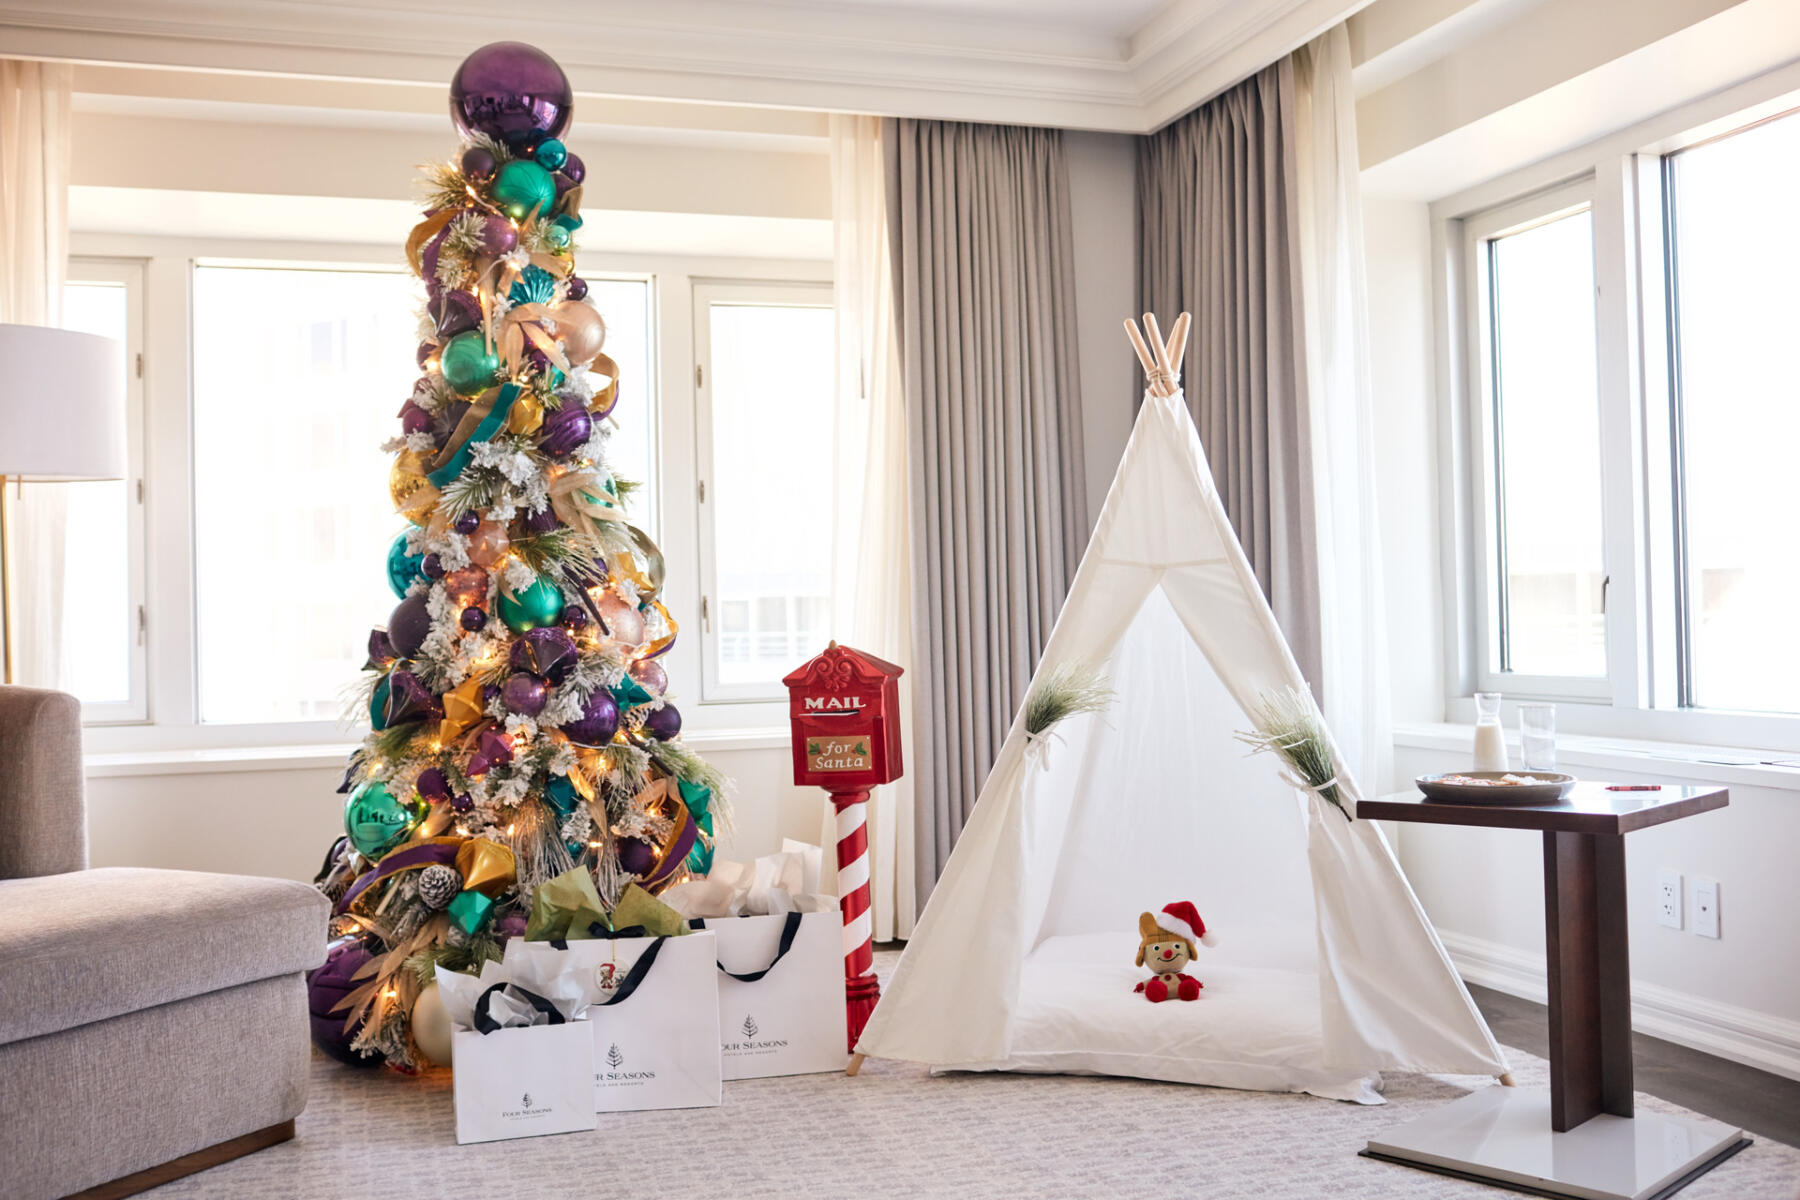 Four Seasons Chicago, guest room decorated for the holidays